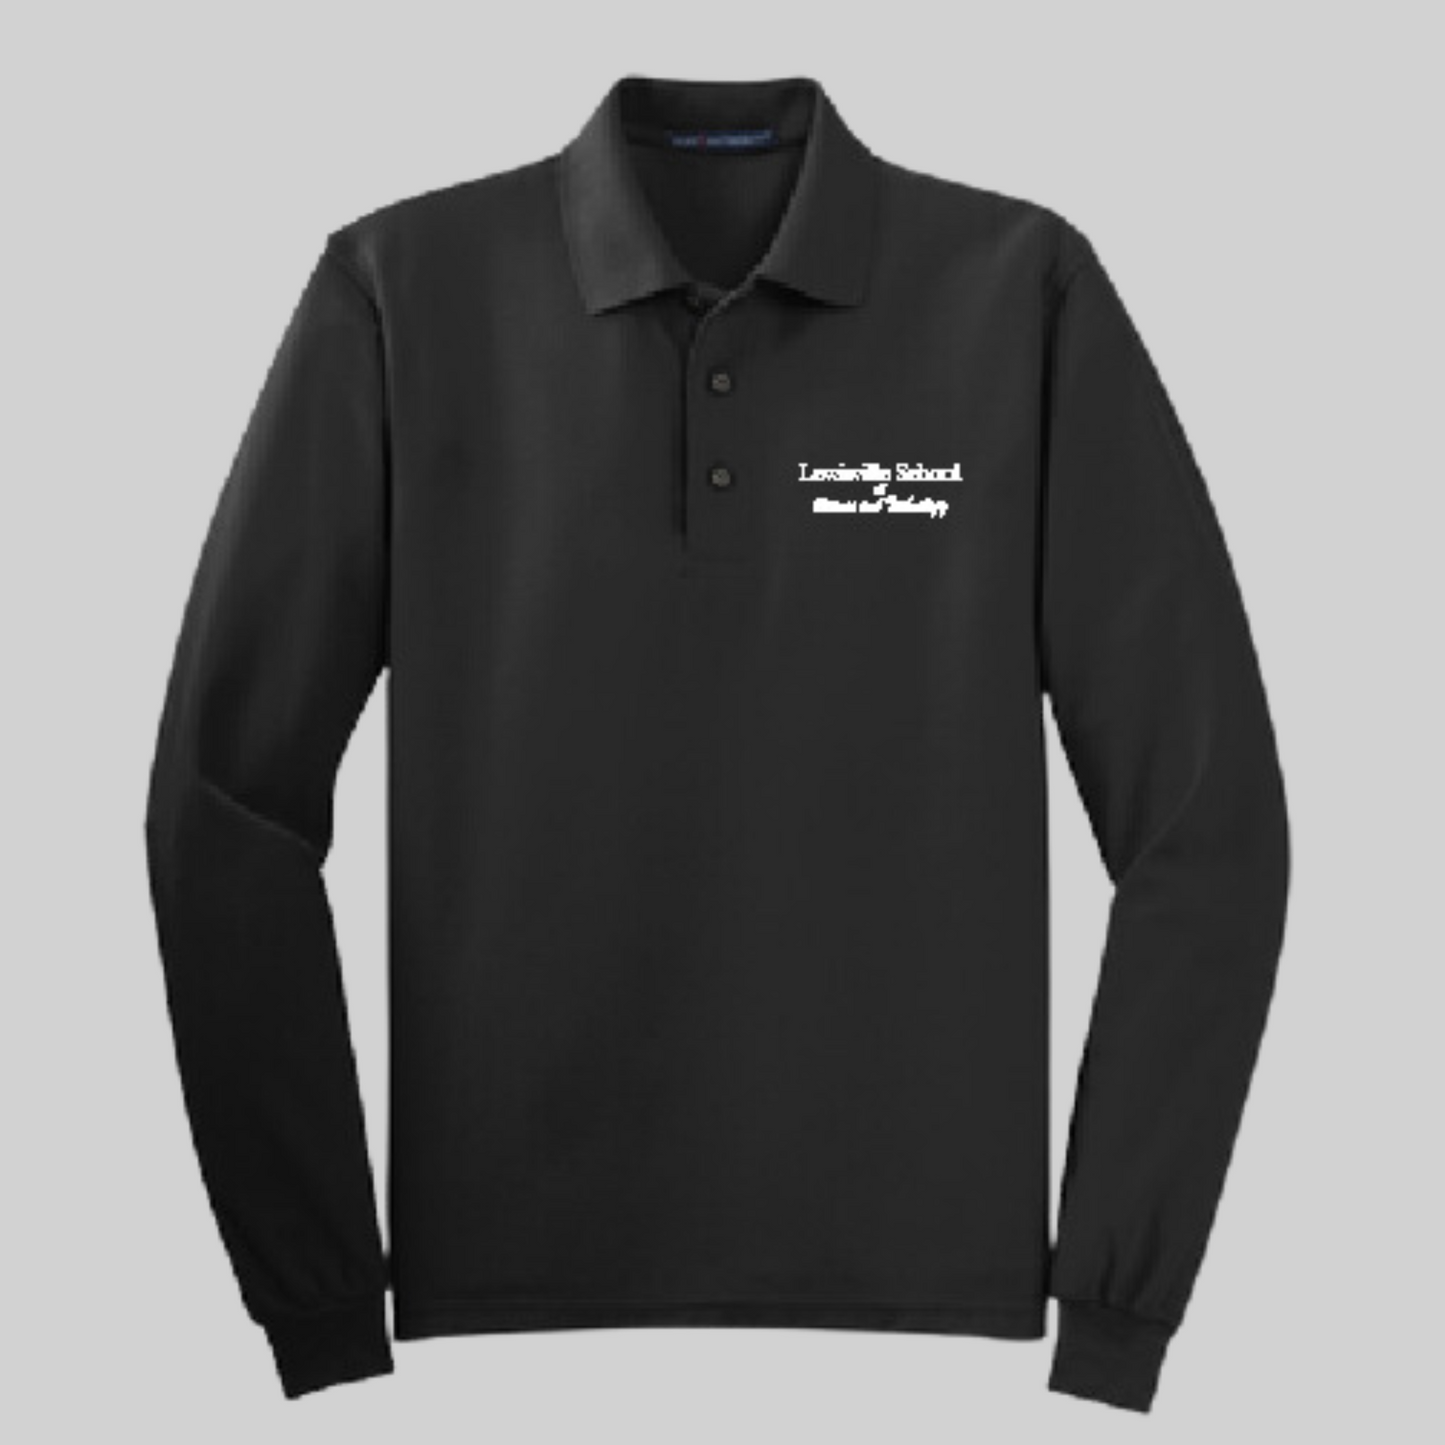 iSchool (Lewisville School of Science and Technology) Long Sleeve Cotton Polo